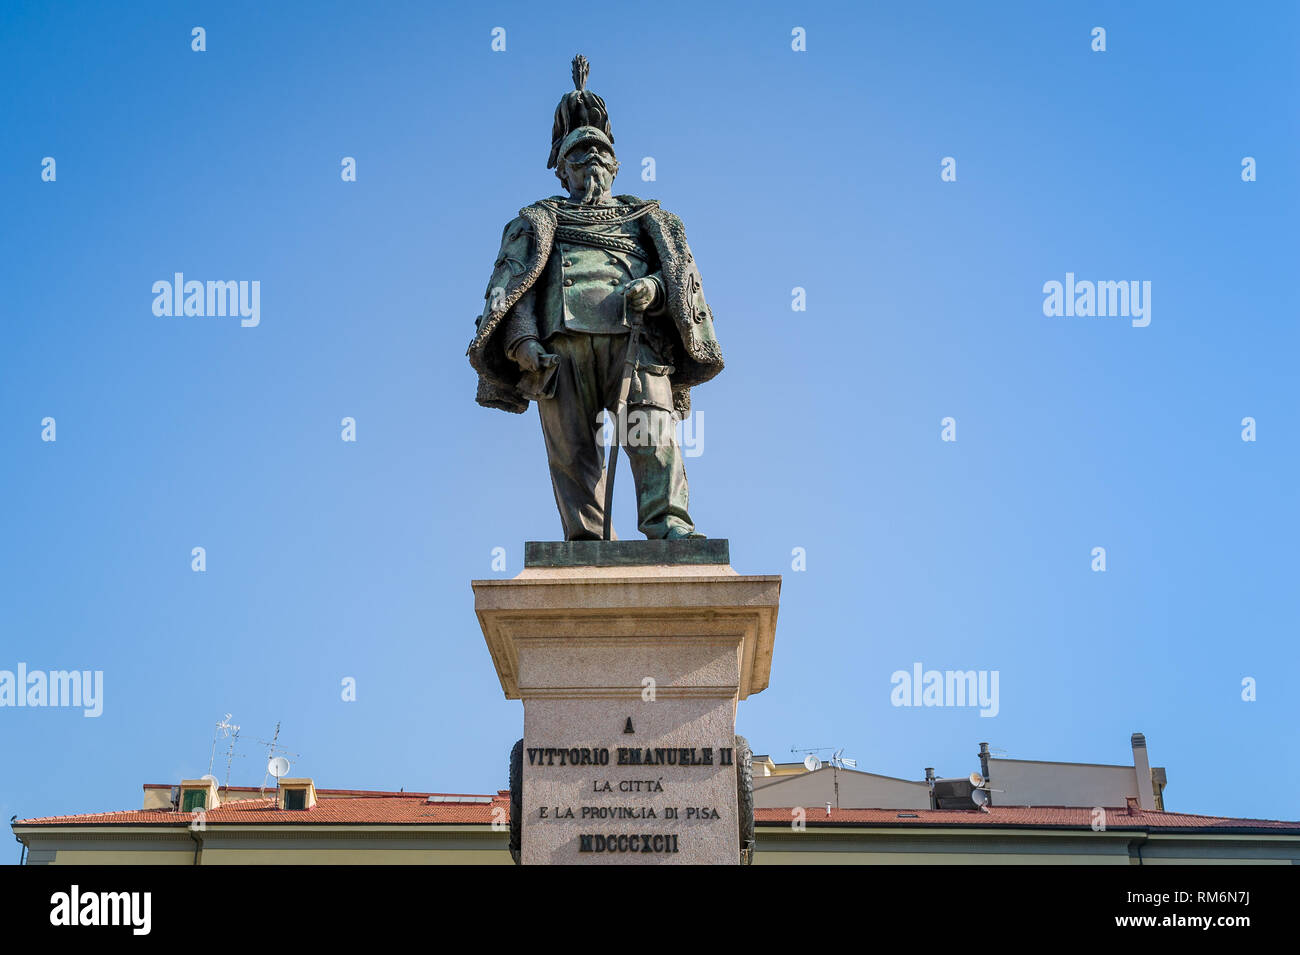 Statua di Vittorio Emanuele II at Pisa old town, front view. Toscana province, Italy. Stock Photo